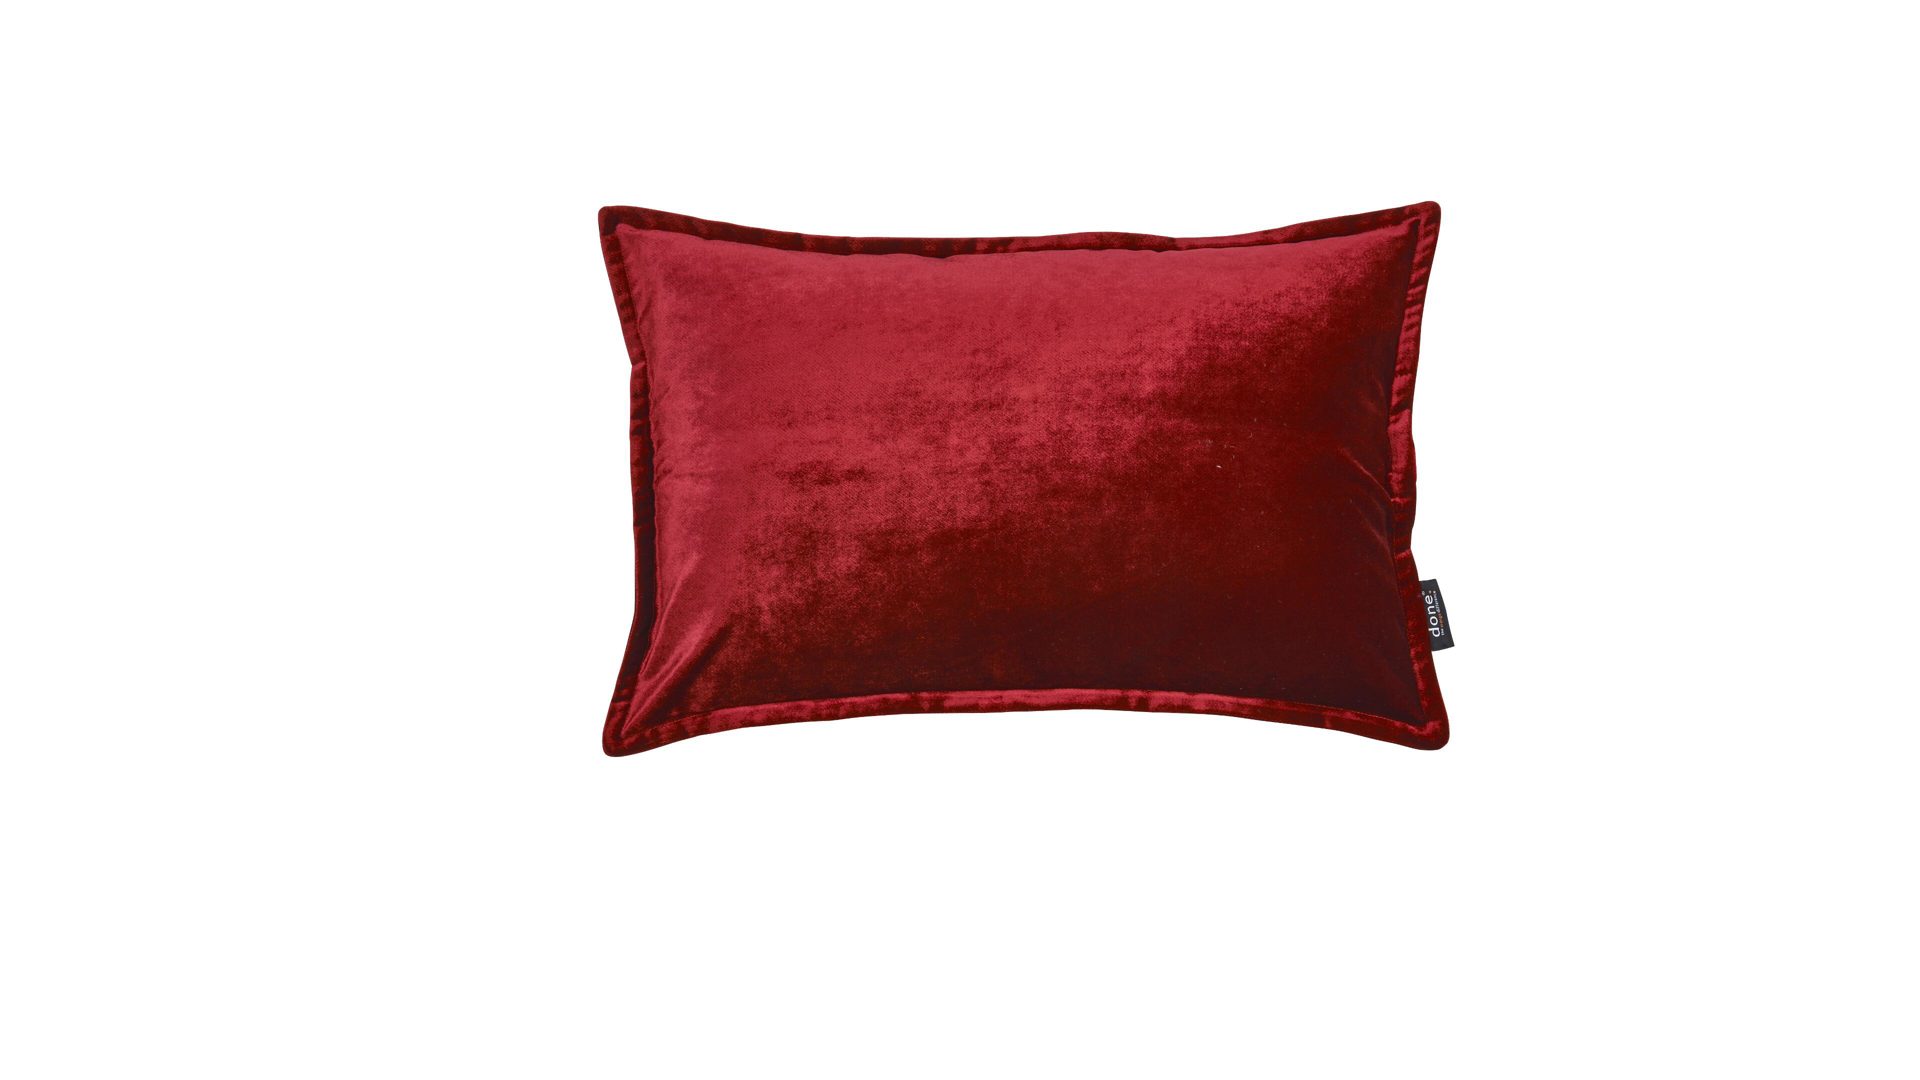 Kissenbezug /-hülle Done.® aus Stoff in Dunkelrot done.® Kissenhülle Cushion Glam roter Samt – ca. 40 x 60 cm